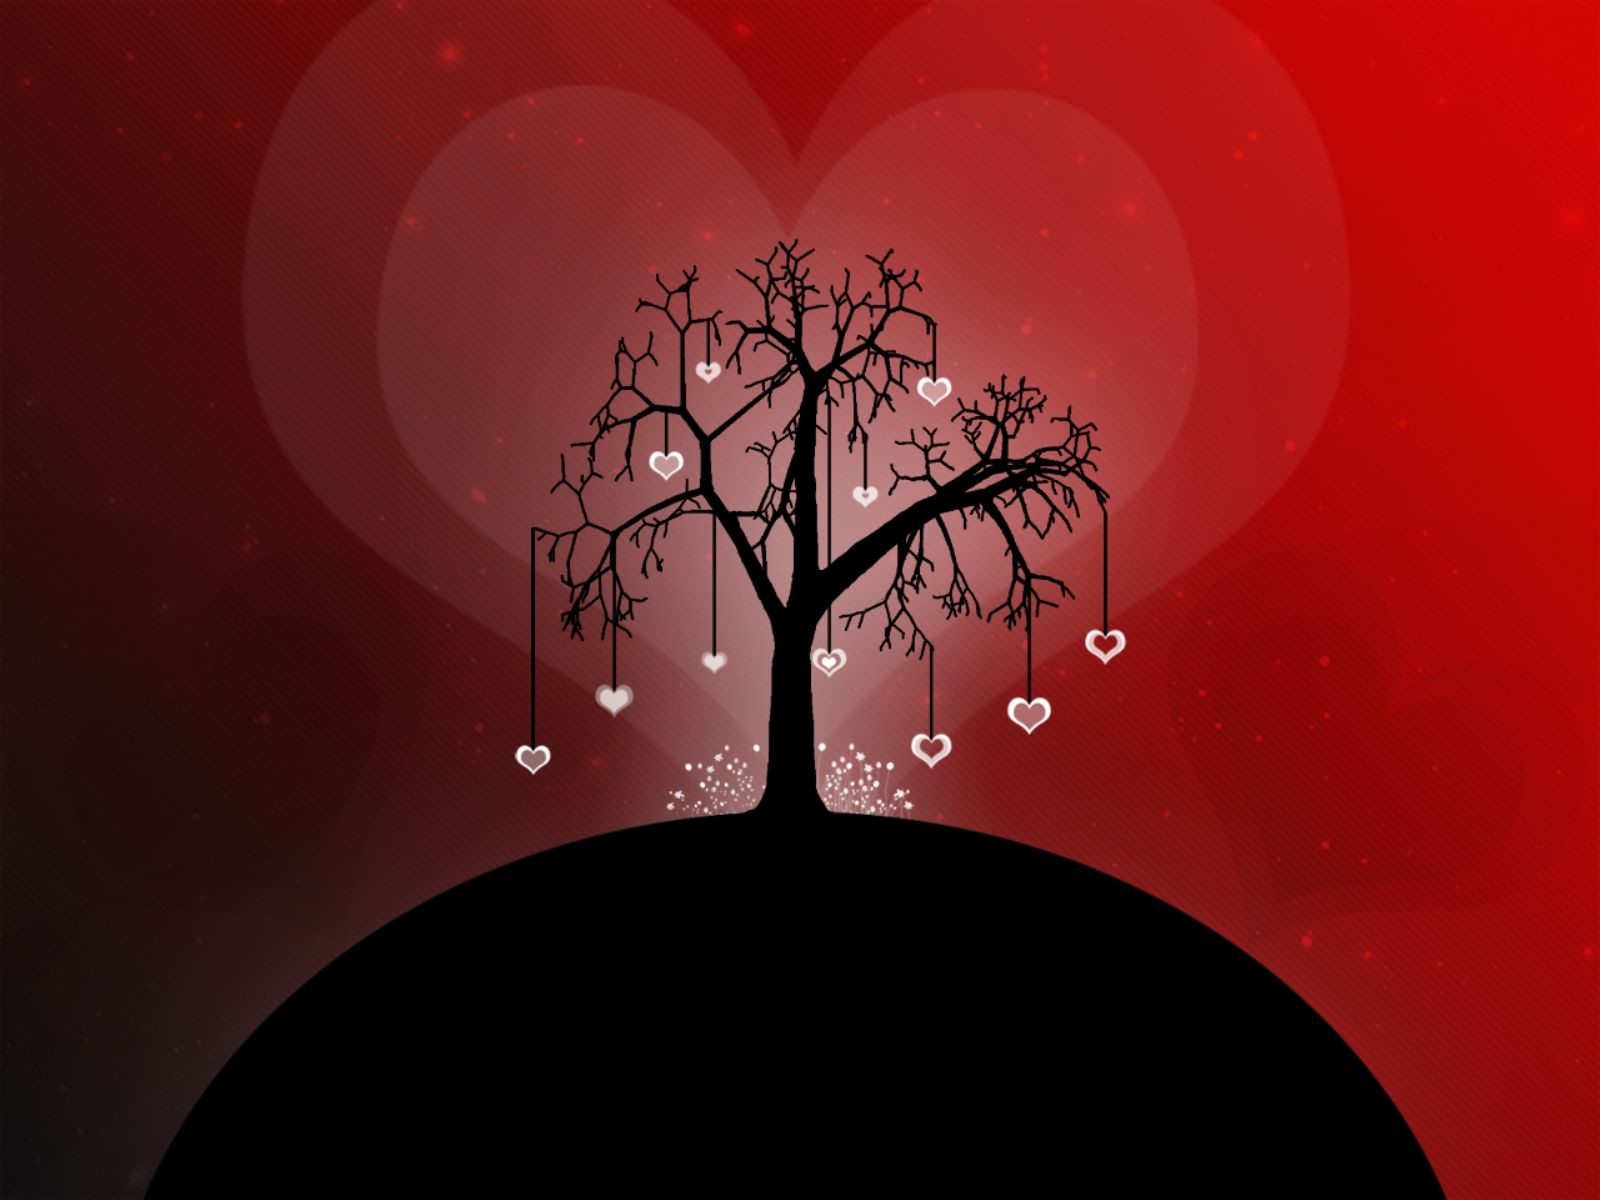 689 Love HD Wallpapers Backgrounds - Wallpaper Abyss